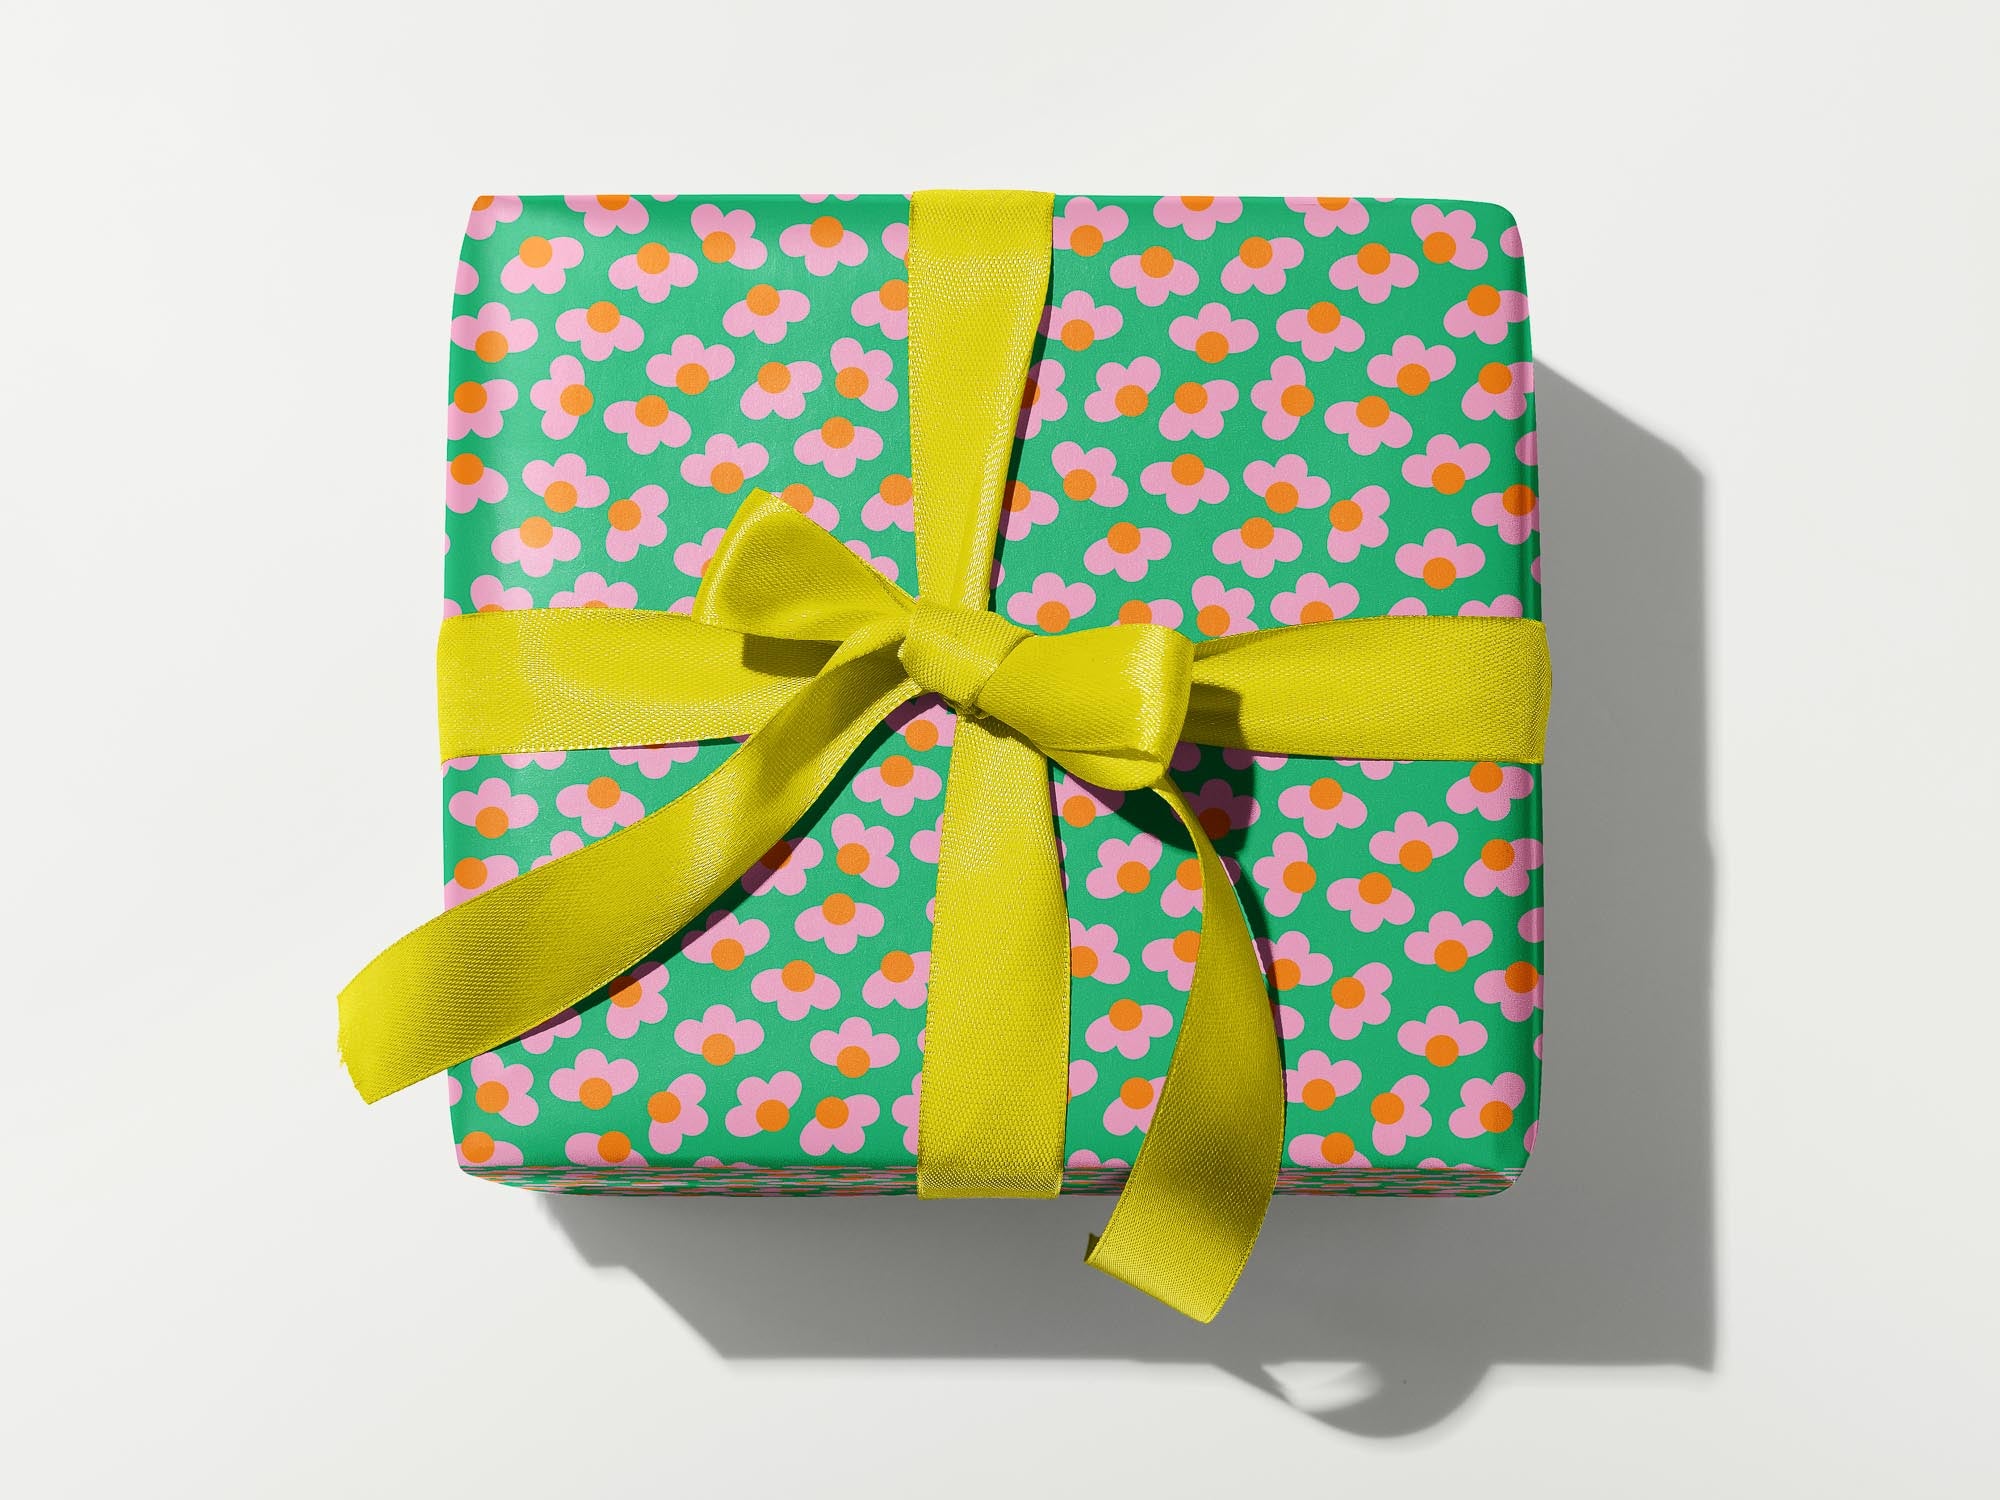 a present wrapped in green and pink paper with a yellow bow